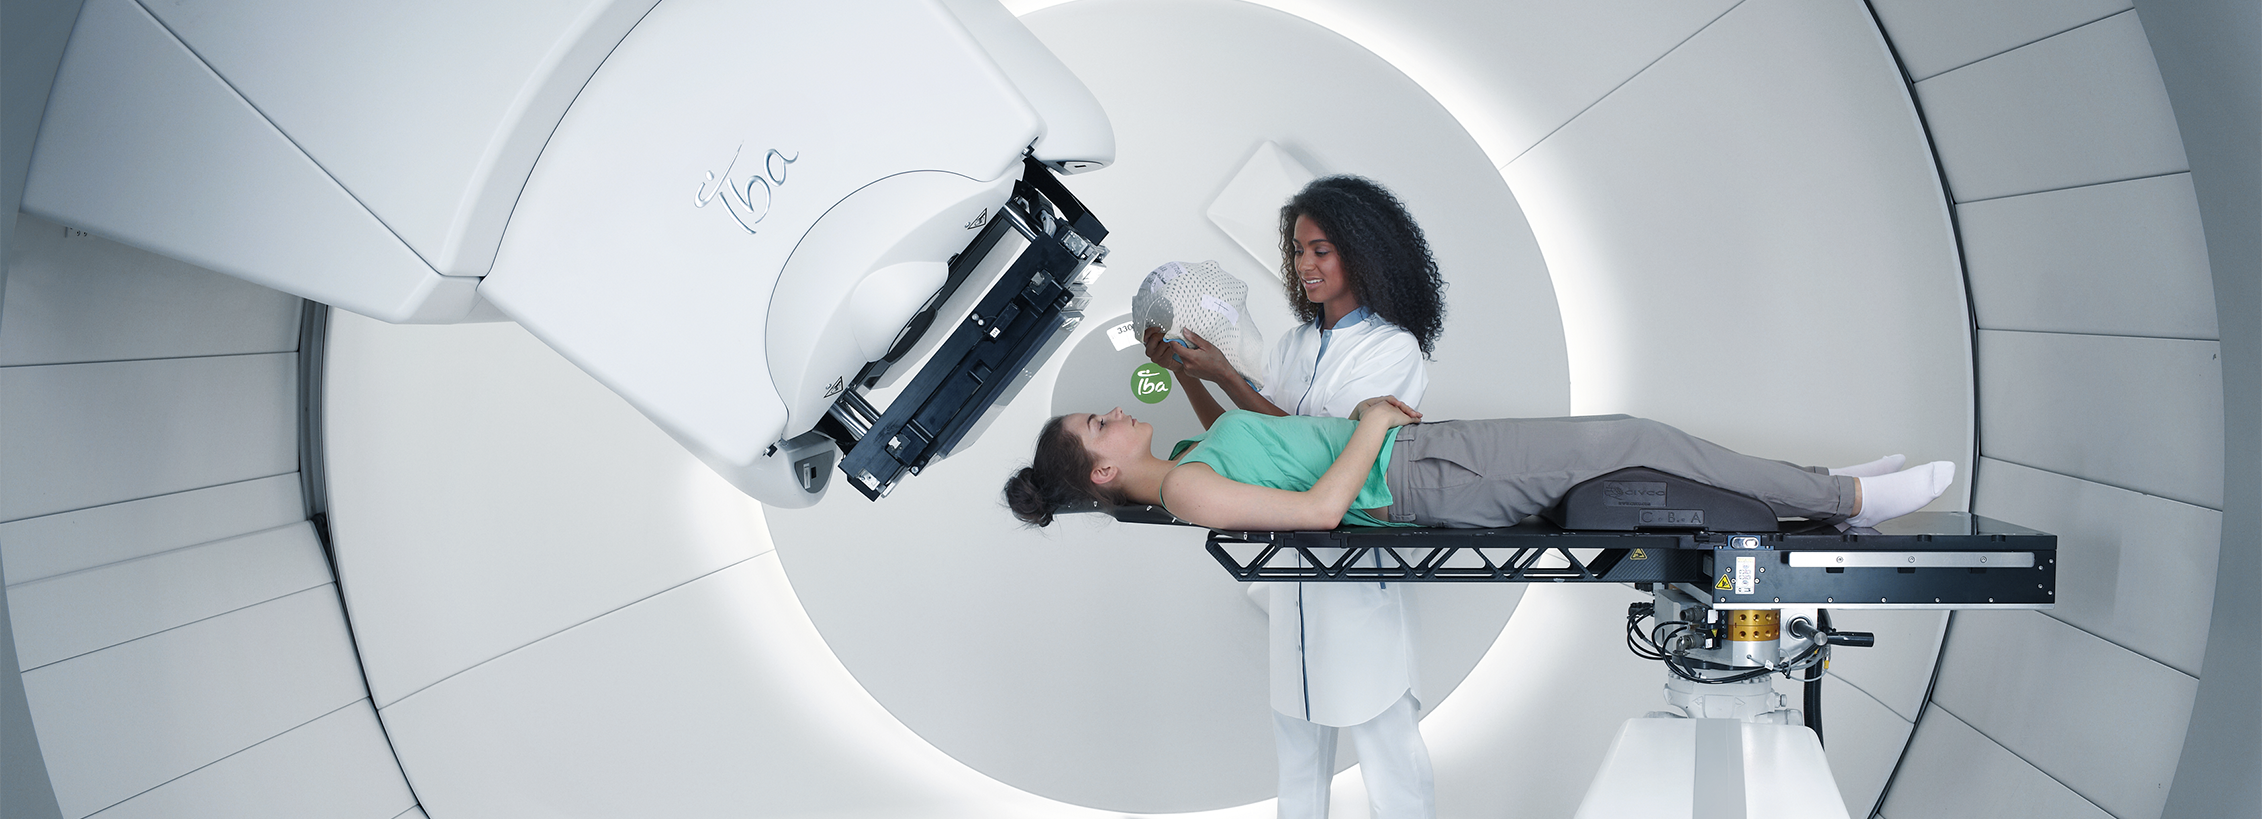 Image guided proton therapy for the treatment of cancers